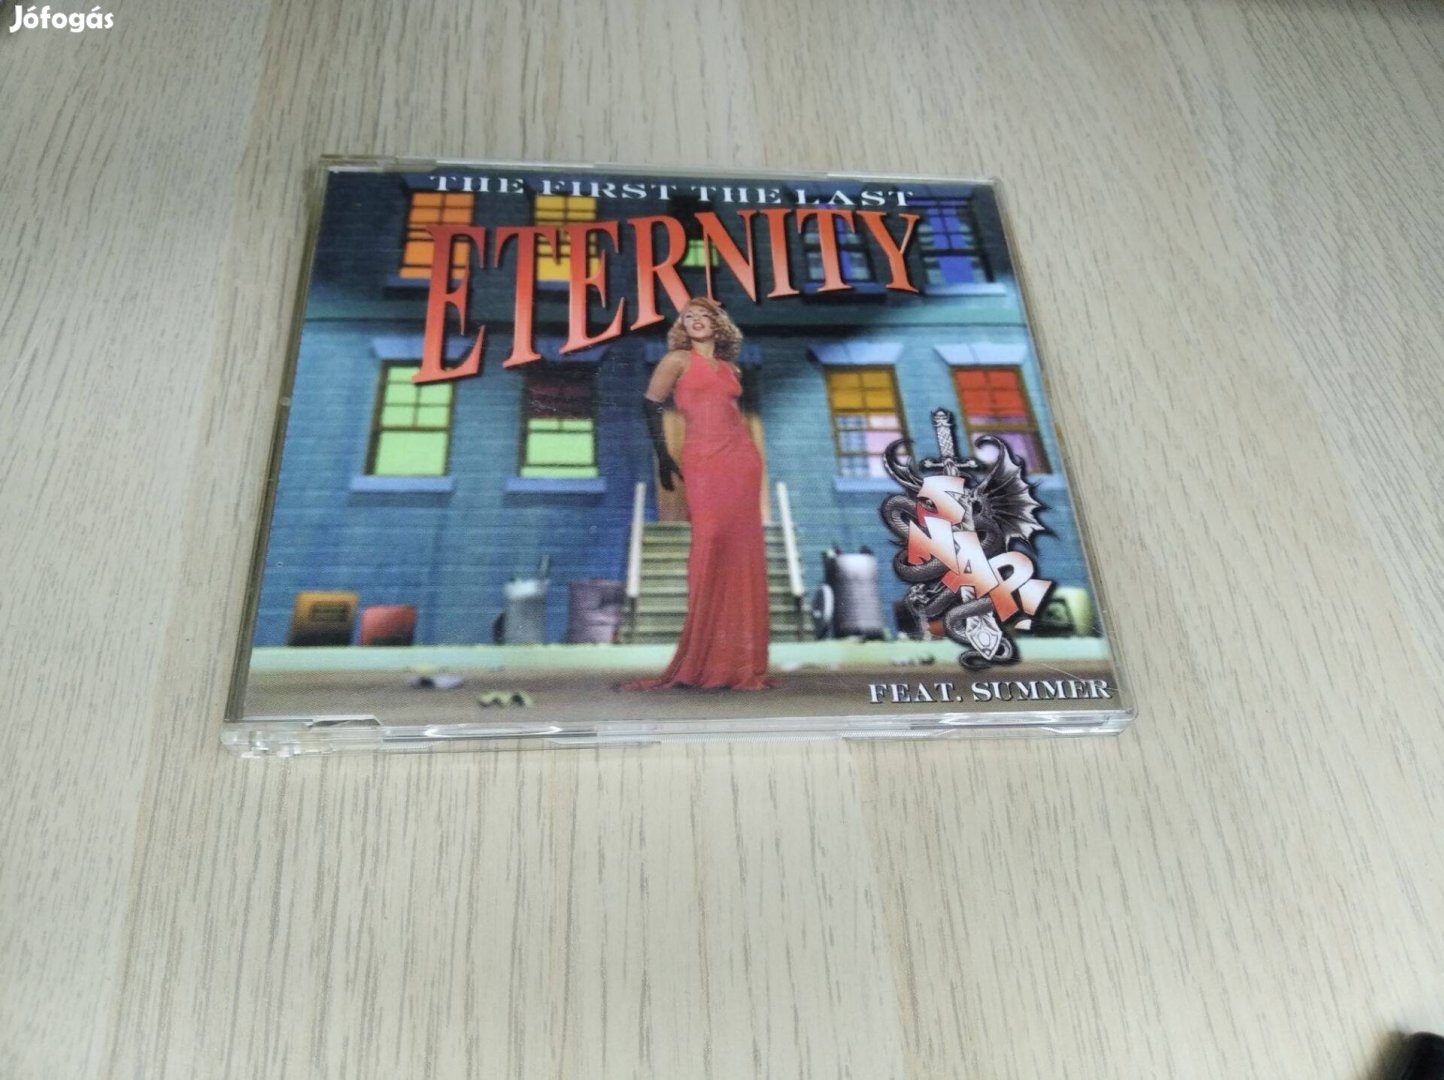 Snap! Feat. Summer - The First The Last Eternity / Maxi CD 1995